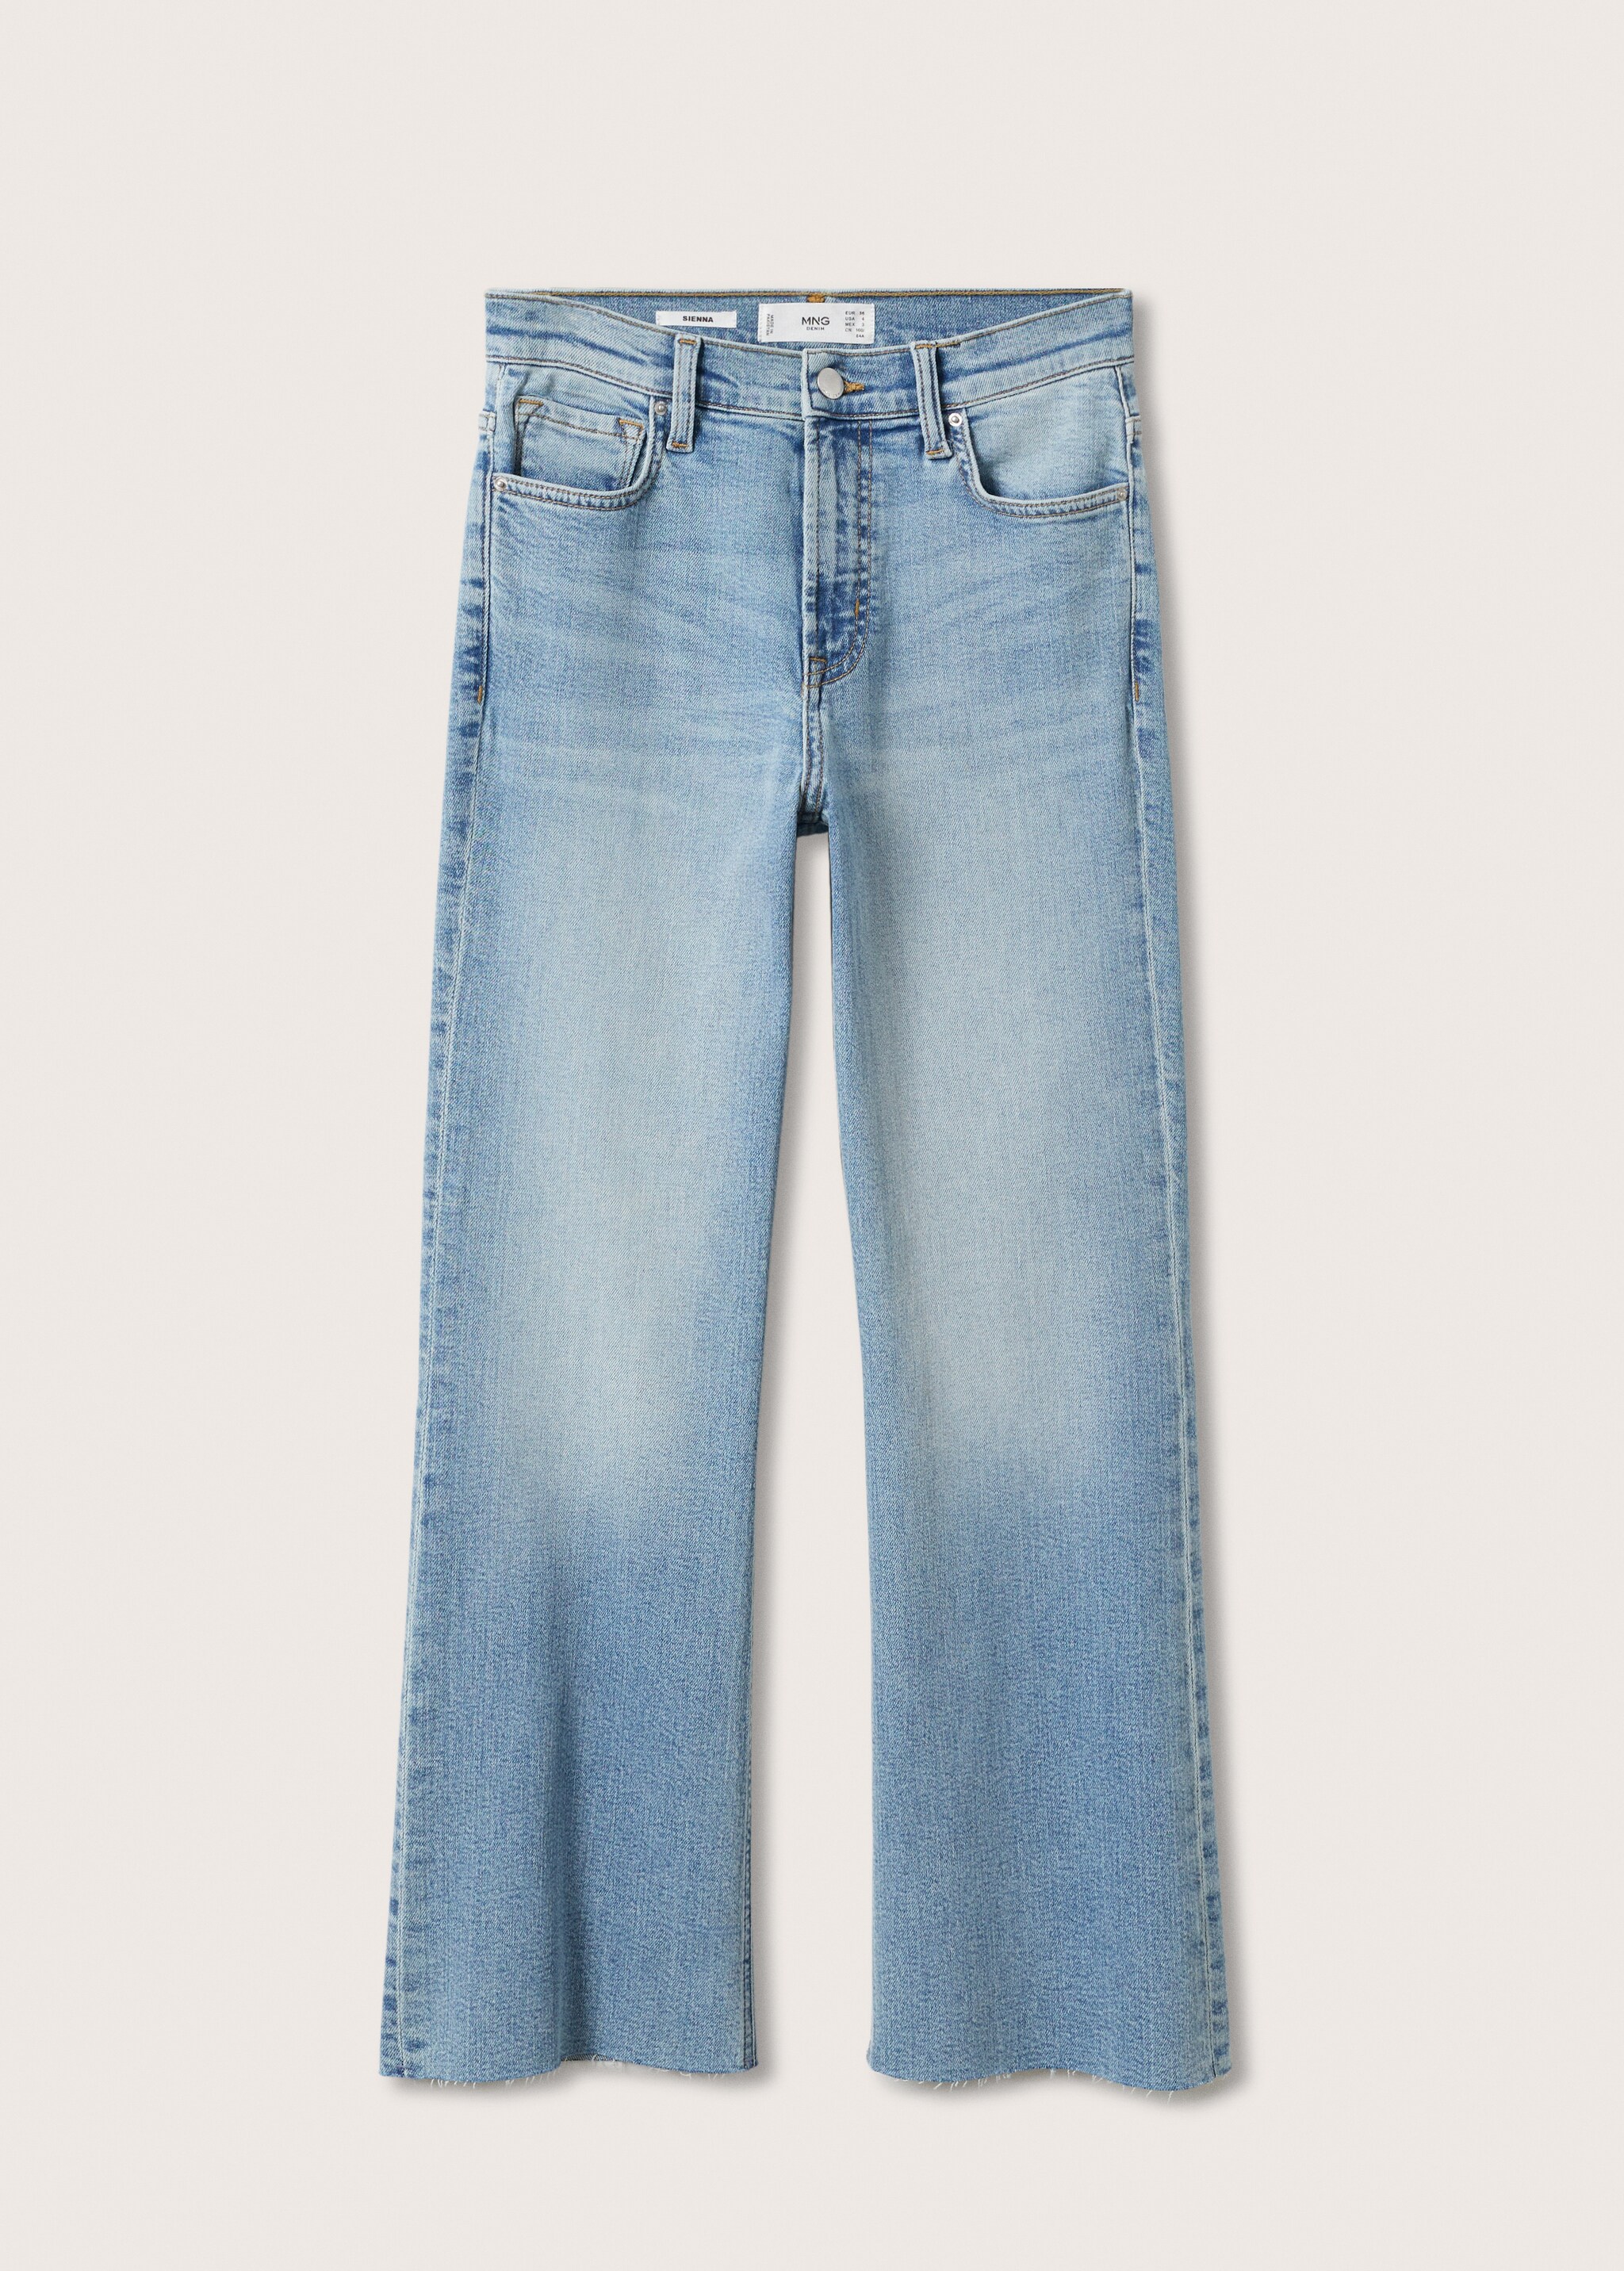 High-waist bootcut jeans - Article without model